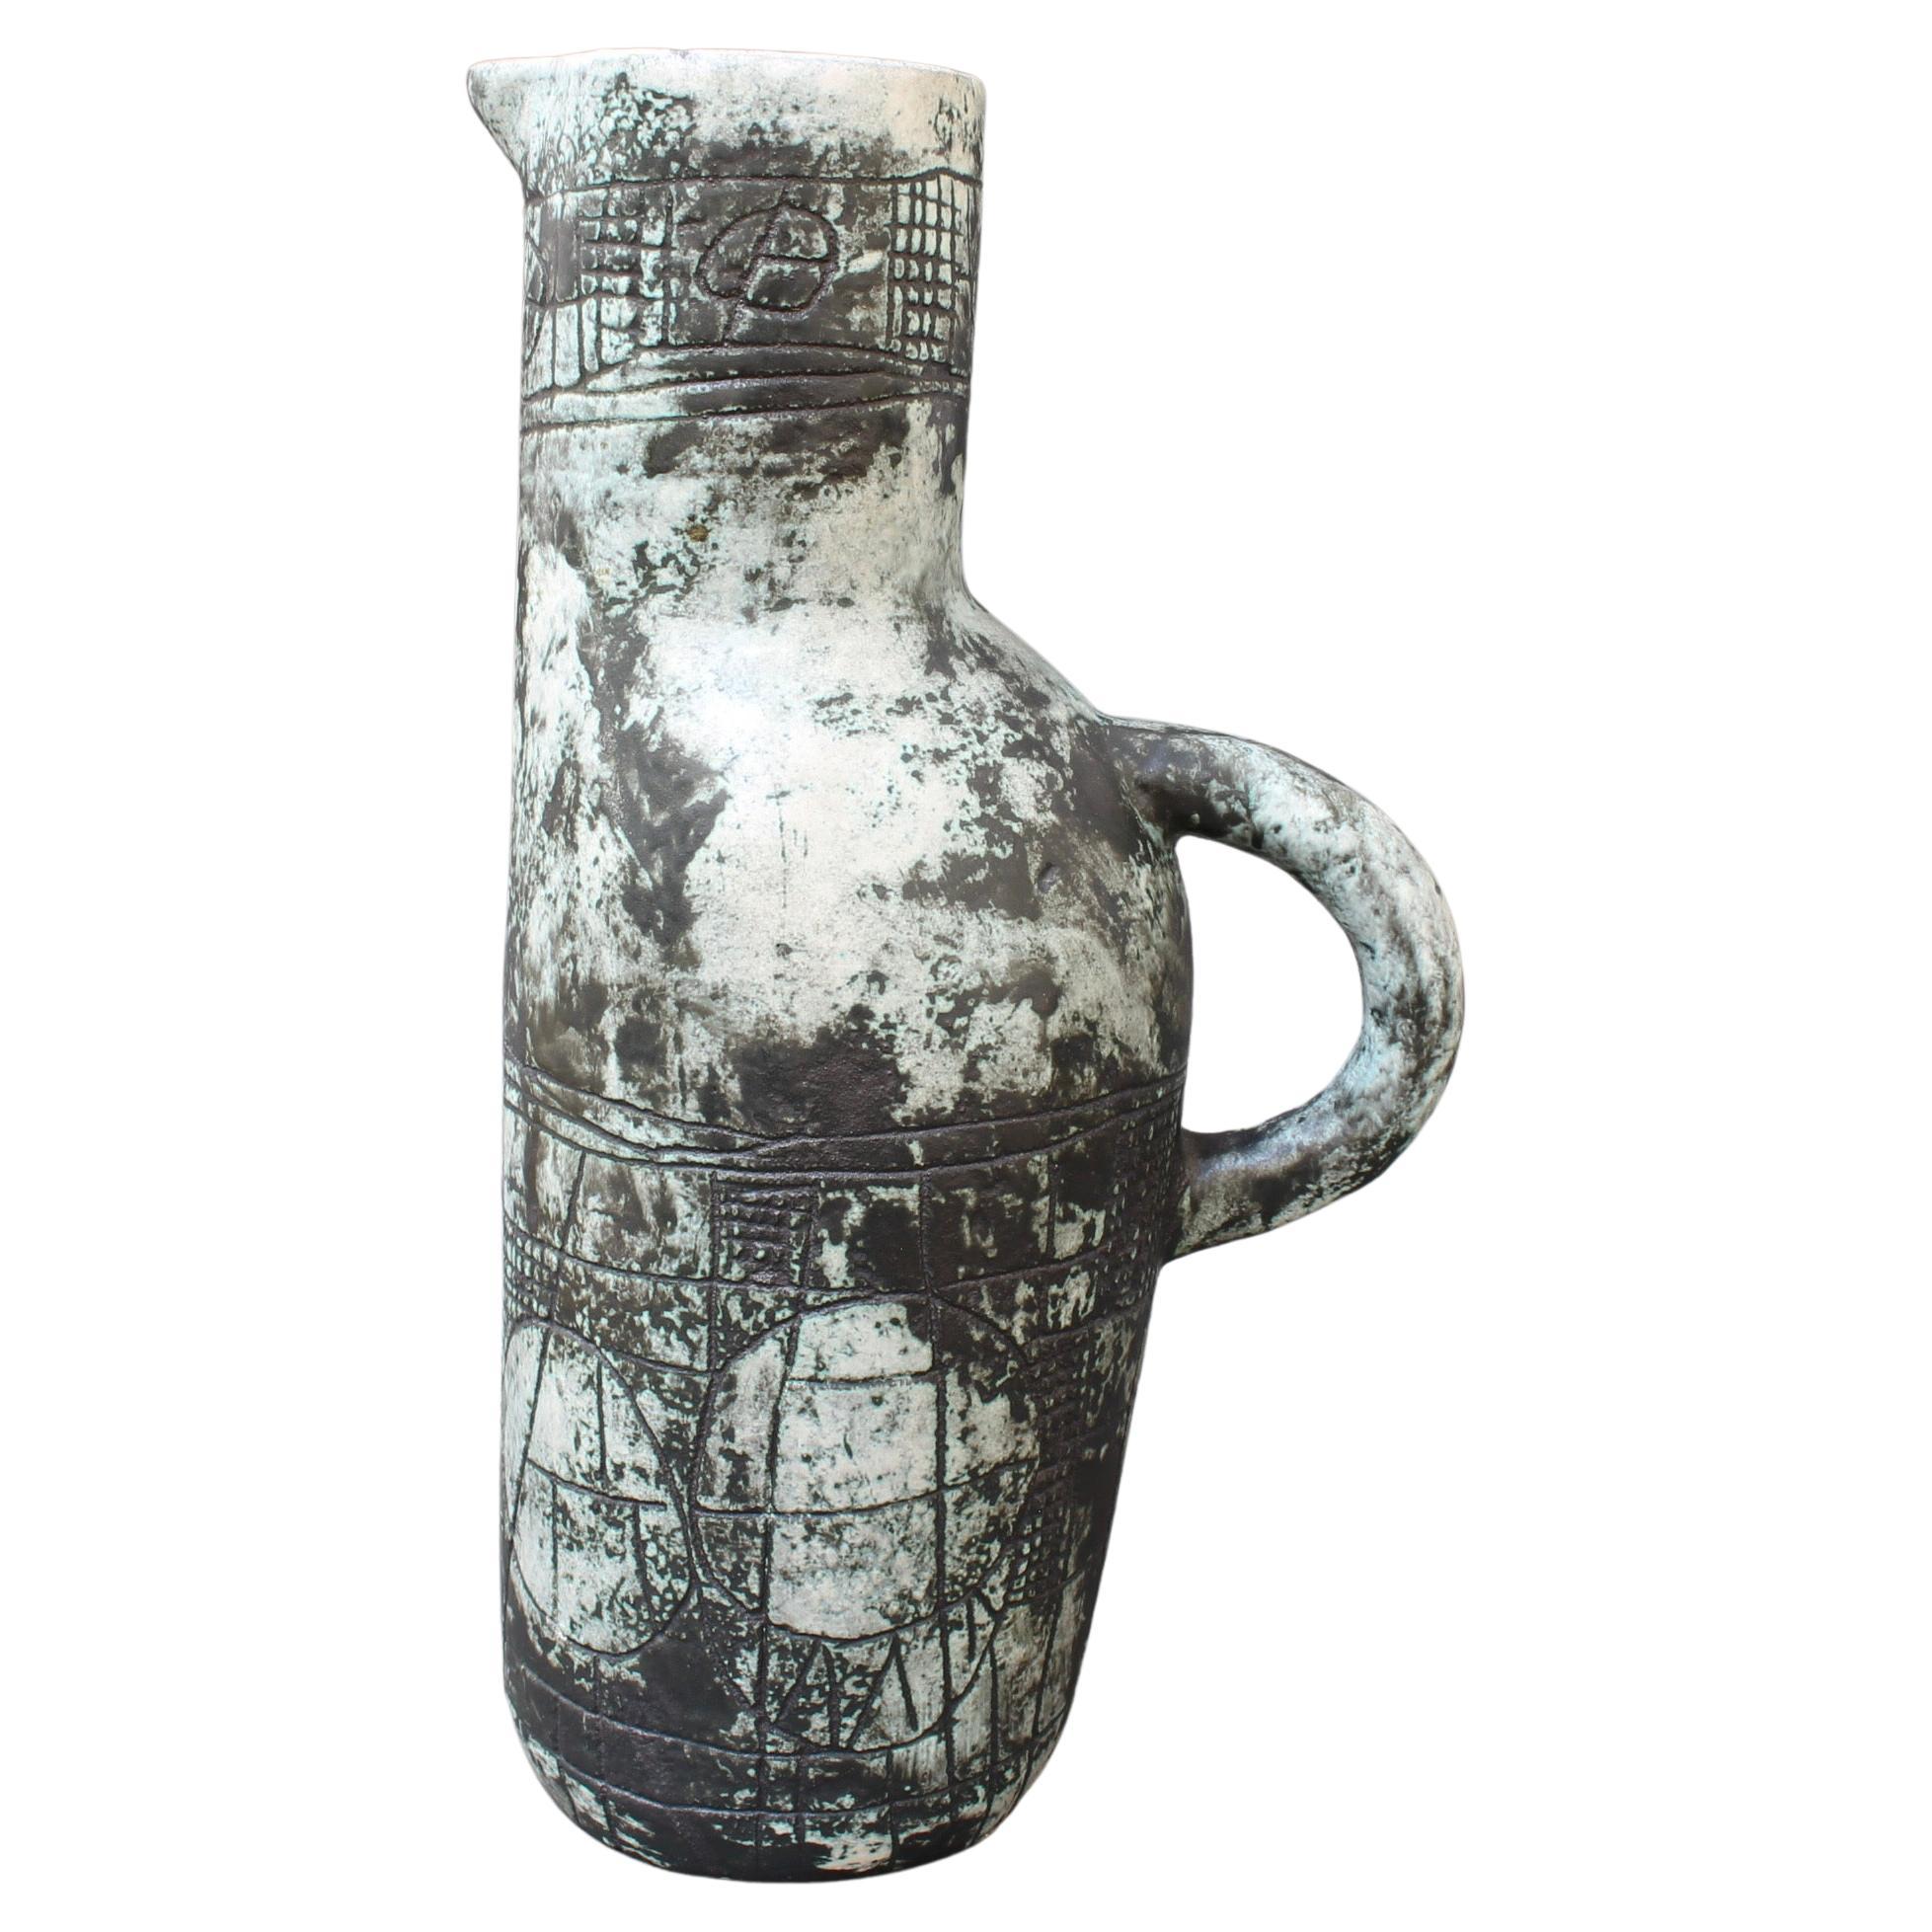 Vintage French Ceramic Pitcher by Jacques Blin, circa 1960s